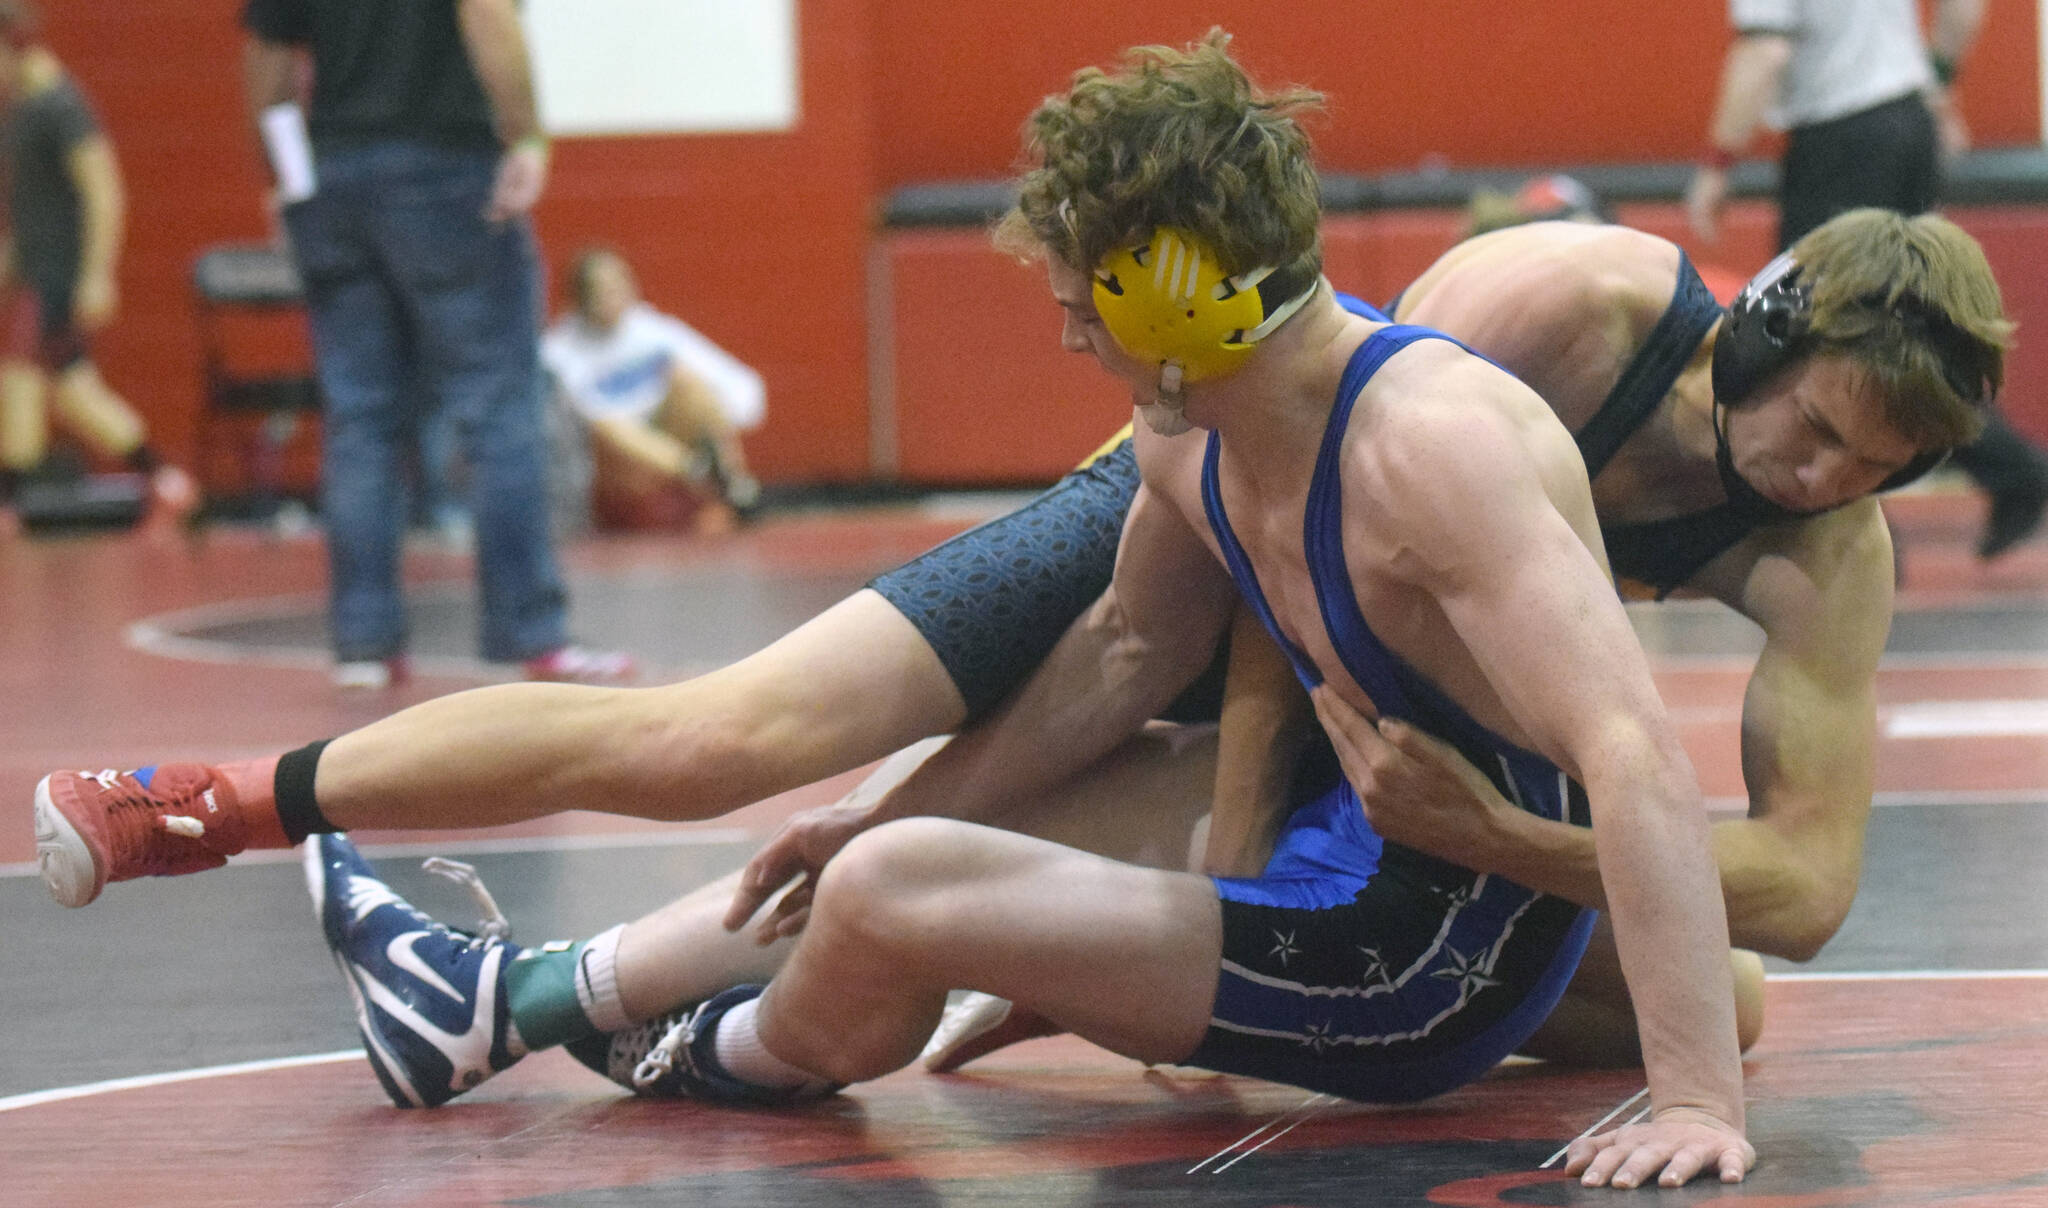 Soldotna’s Hunter Richardson and Homer’s Nestor Kalugin tangle at 189A at the Luke Spruill Memorial Tournament on Saturday, Oct. 23, 2021, at Kenai Central High School in Kenai, Alaska. Richardson won the match 11-1 on the way to first place, while Kalugin was third. (Photo by Jeff Helminiak/Peninsula Clarion)